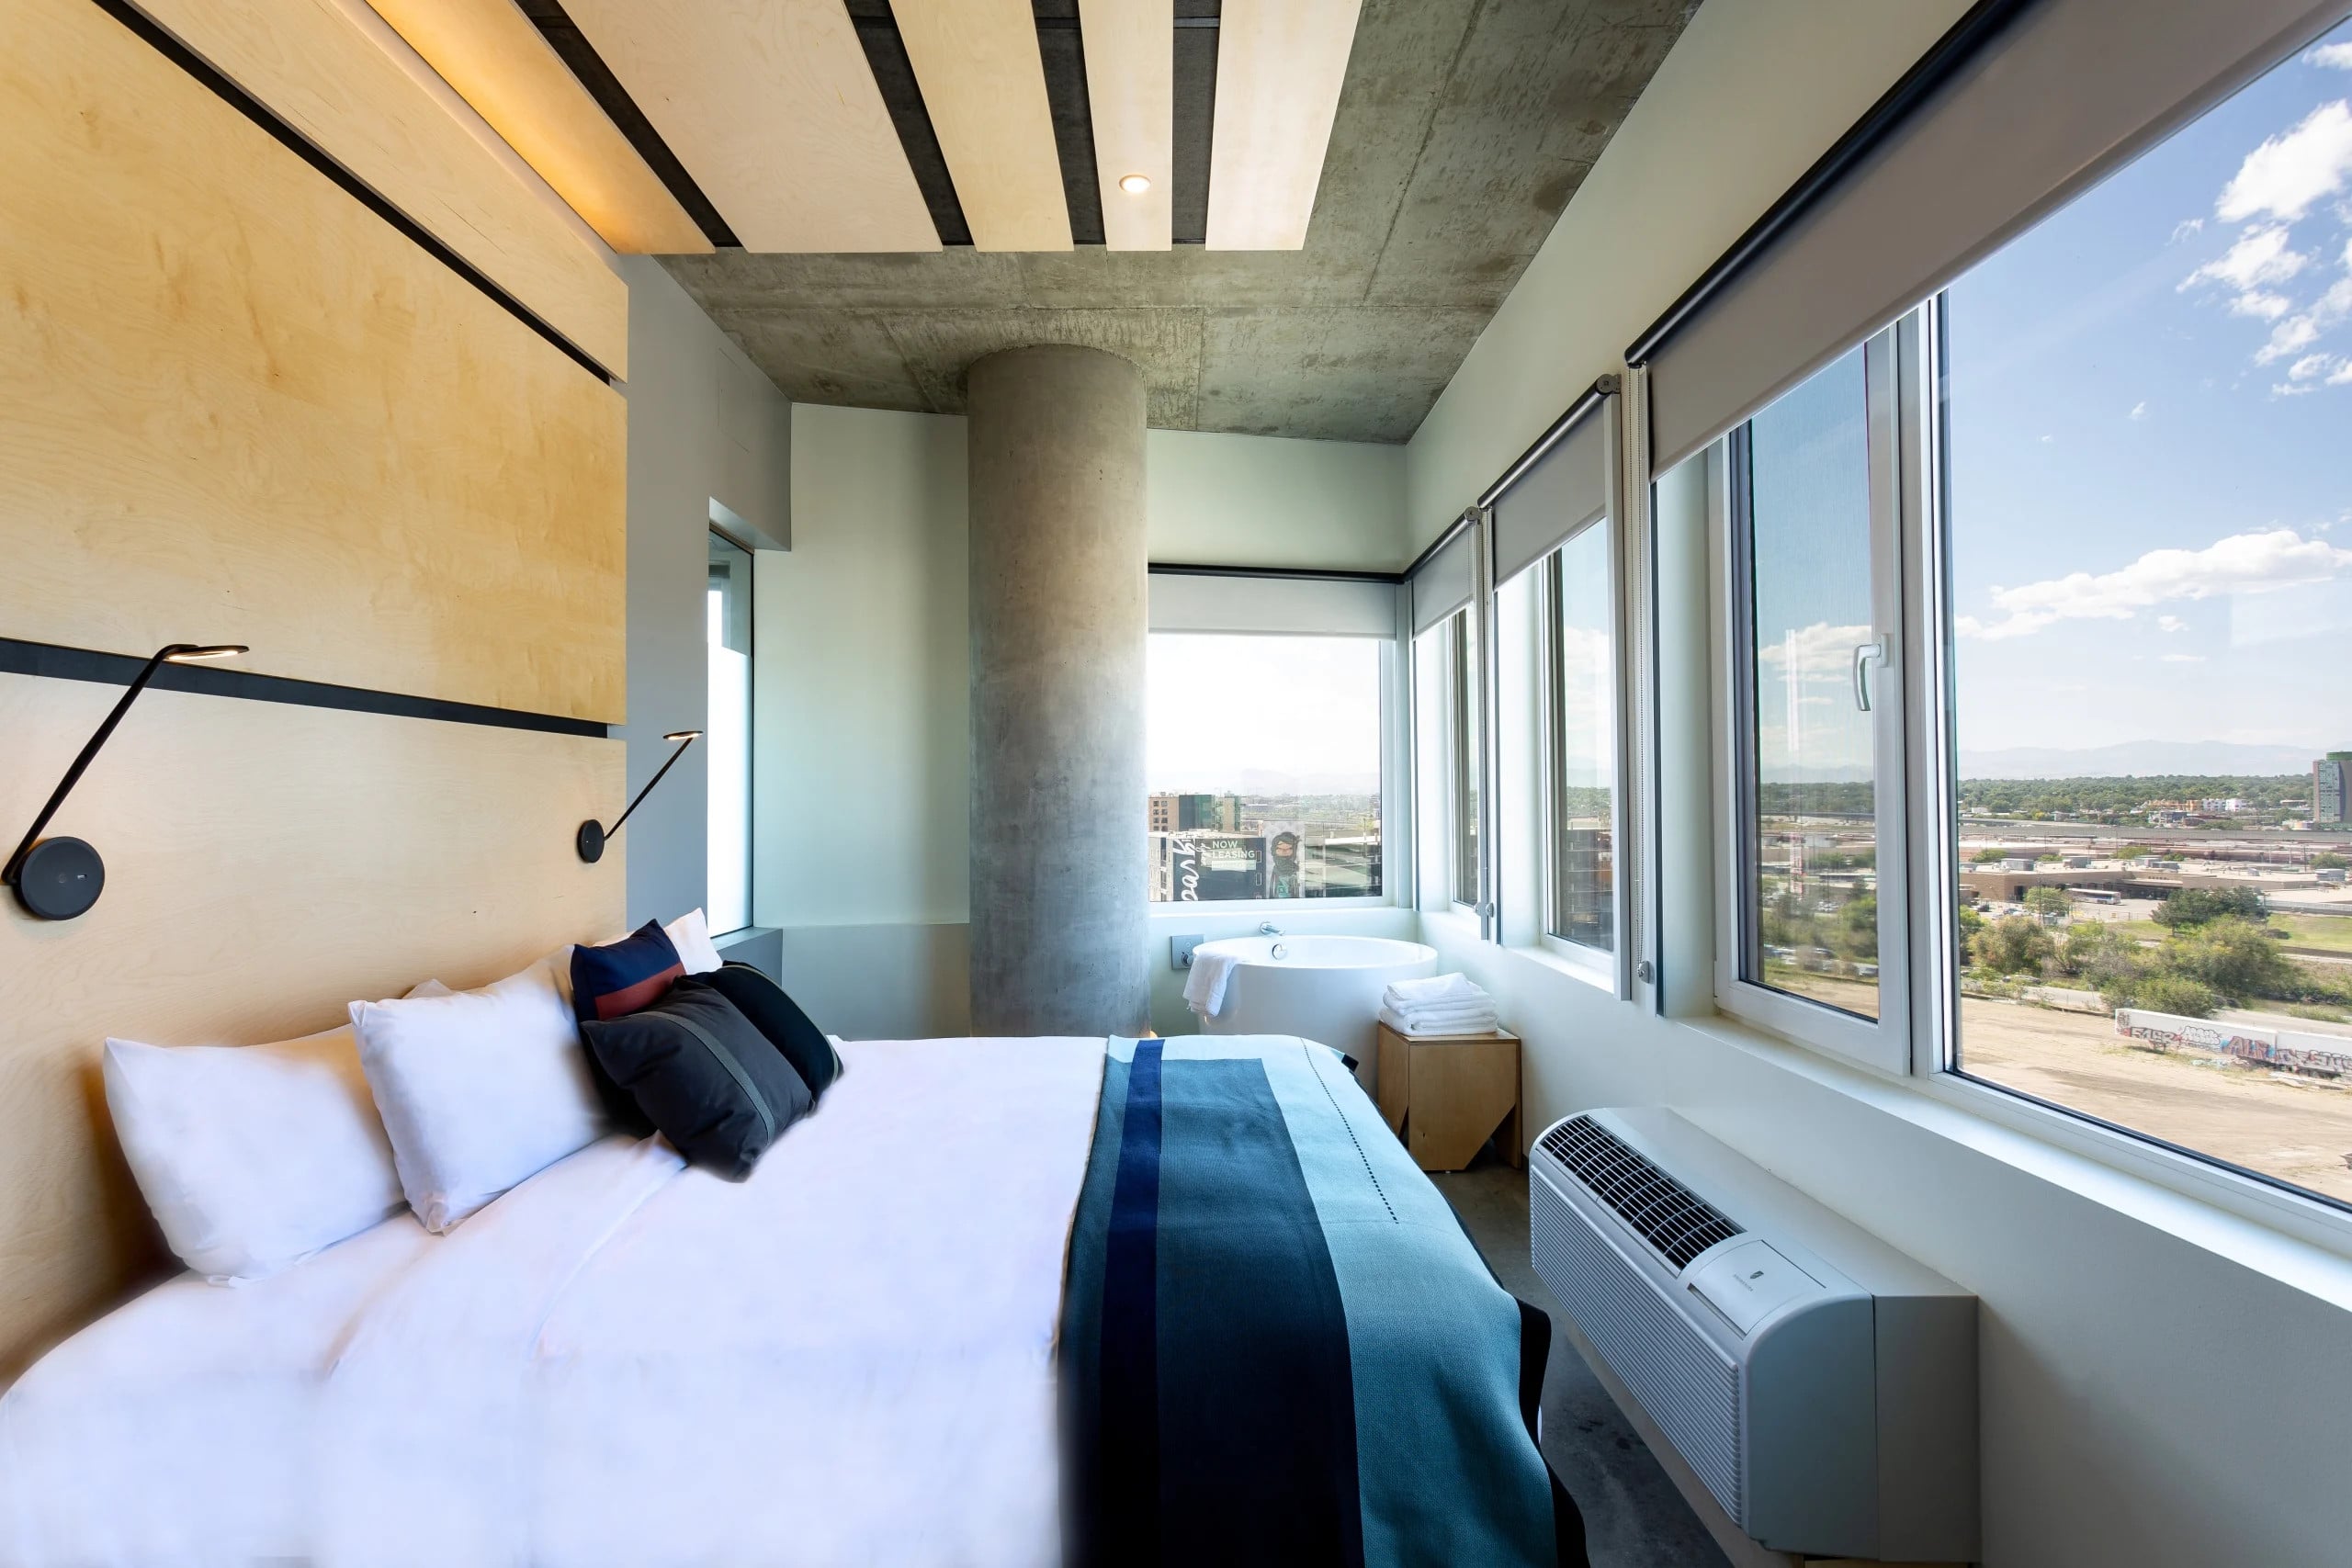 TheSourceHotel_Accommodations_SuiteSkyline_Bedroom